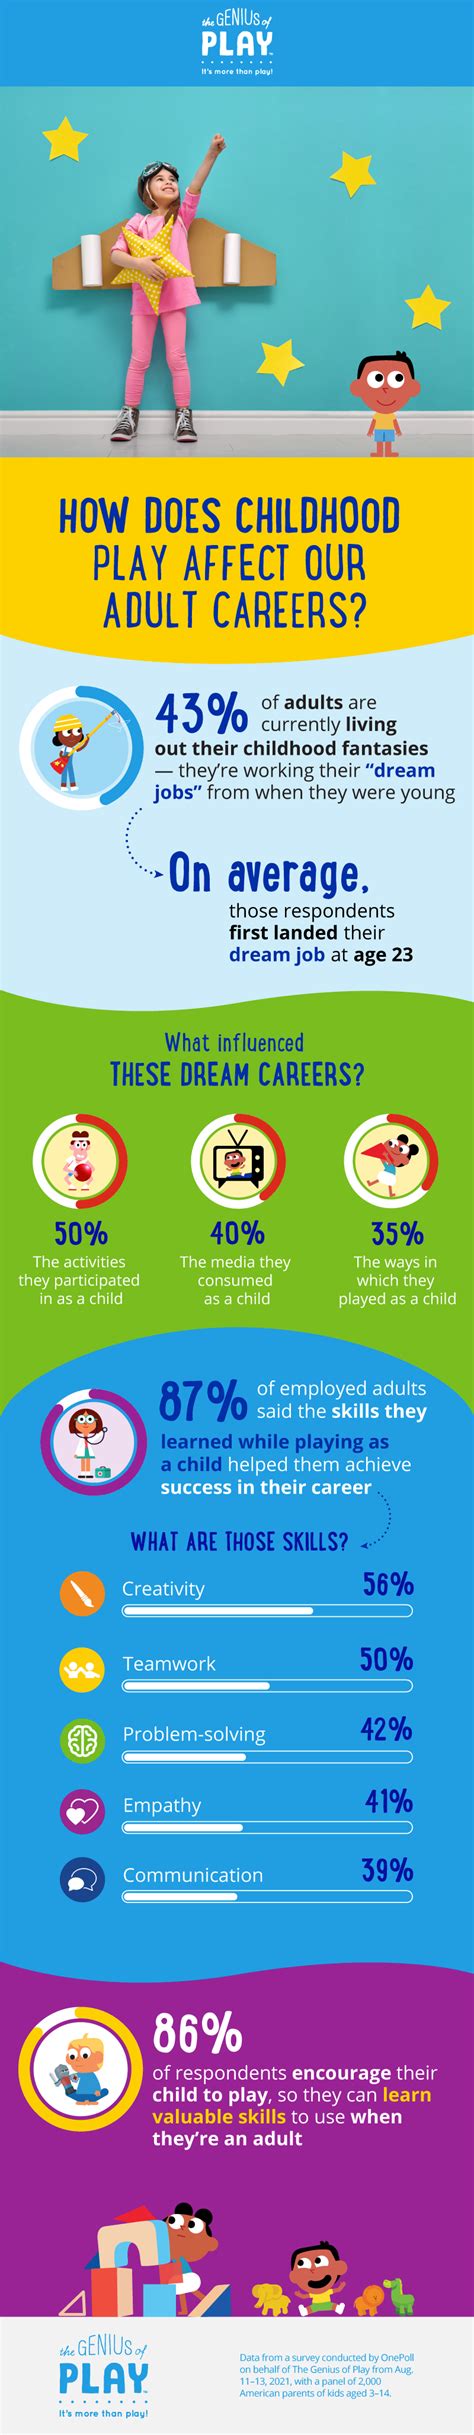 43 Percent Of Adults Report Living Out Their Childhood Dream Jobs